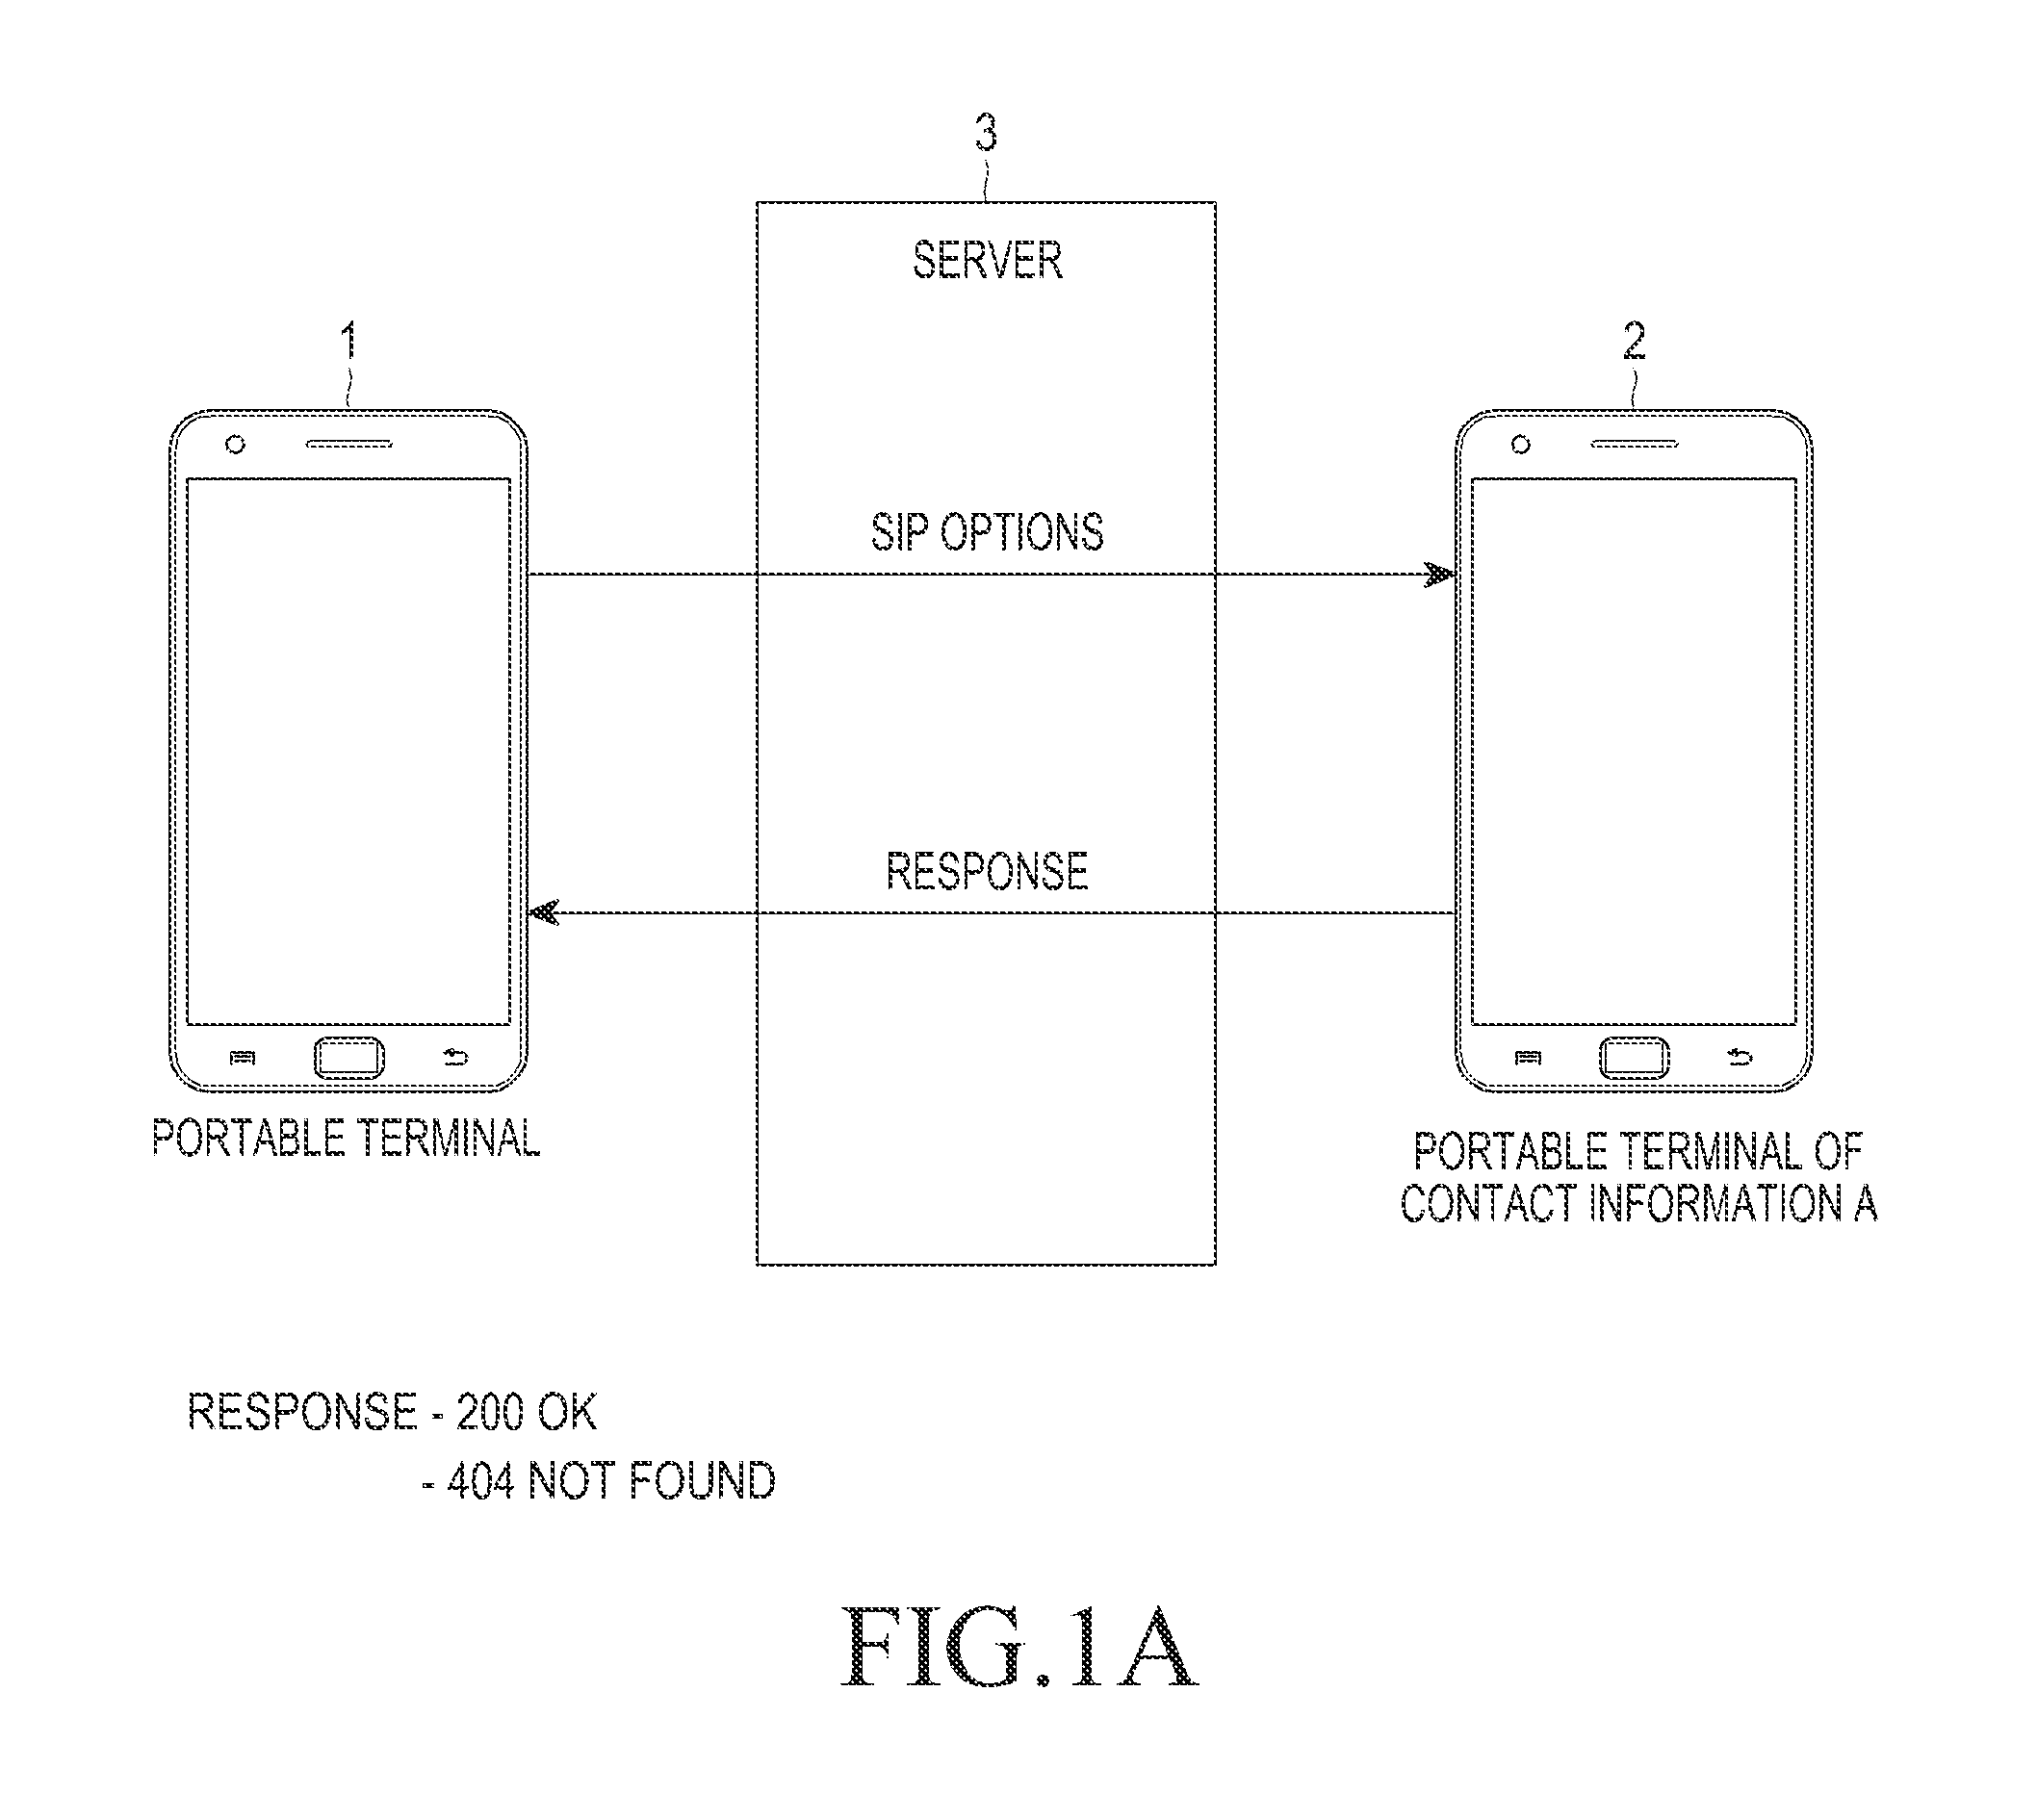 Method and apparatus for performing capability discovery of rich communication suite in a portable terminal